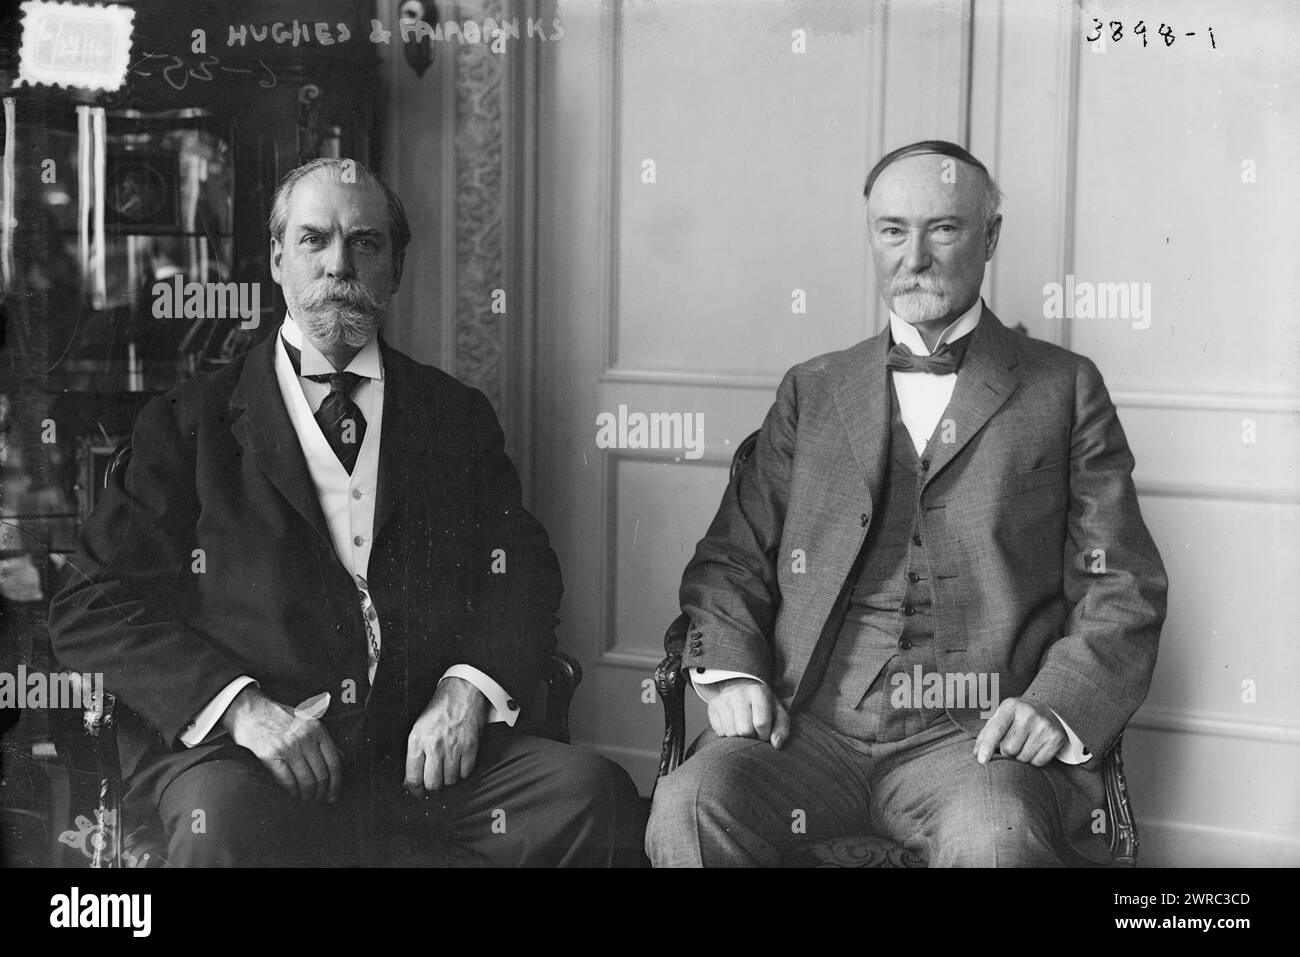 Hughes & Fairbanks, Photograph shows statesman and lawyer Charles Evans Hughes (1862-1948) with politician Charles Warren Fairbanks (1852-1918)., 1916 June 24, Glass negatives, 1 negative: glass Stock Photo